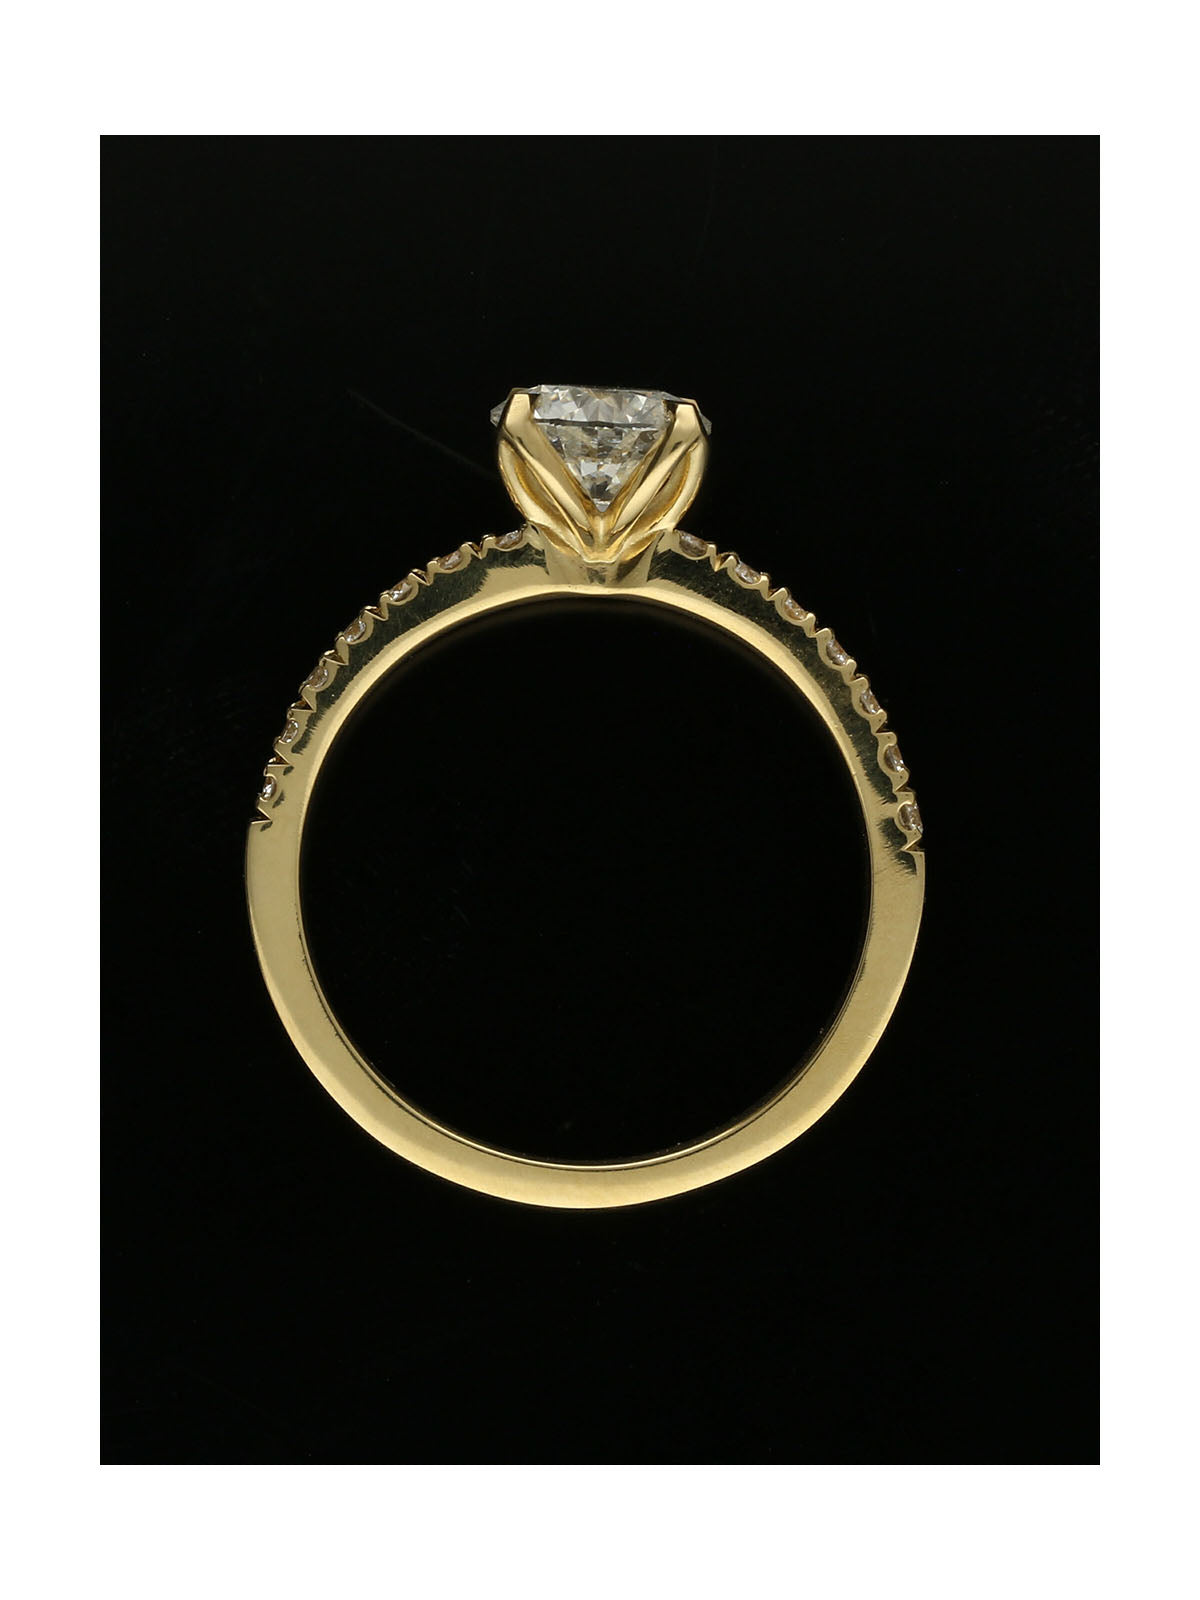 Diamond Solitaire Engagement Ring 1.00ct Certificated Round Brilliant Cut in 18ct Yellow Gold with Diamond Shoulders